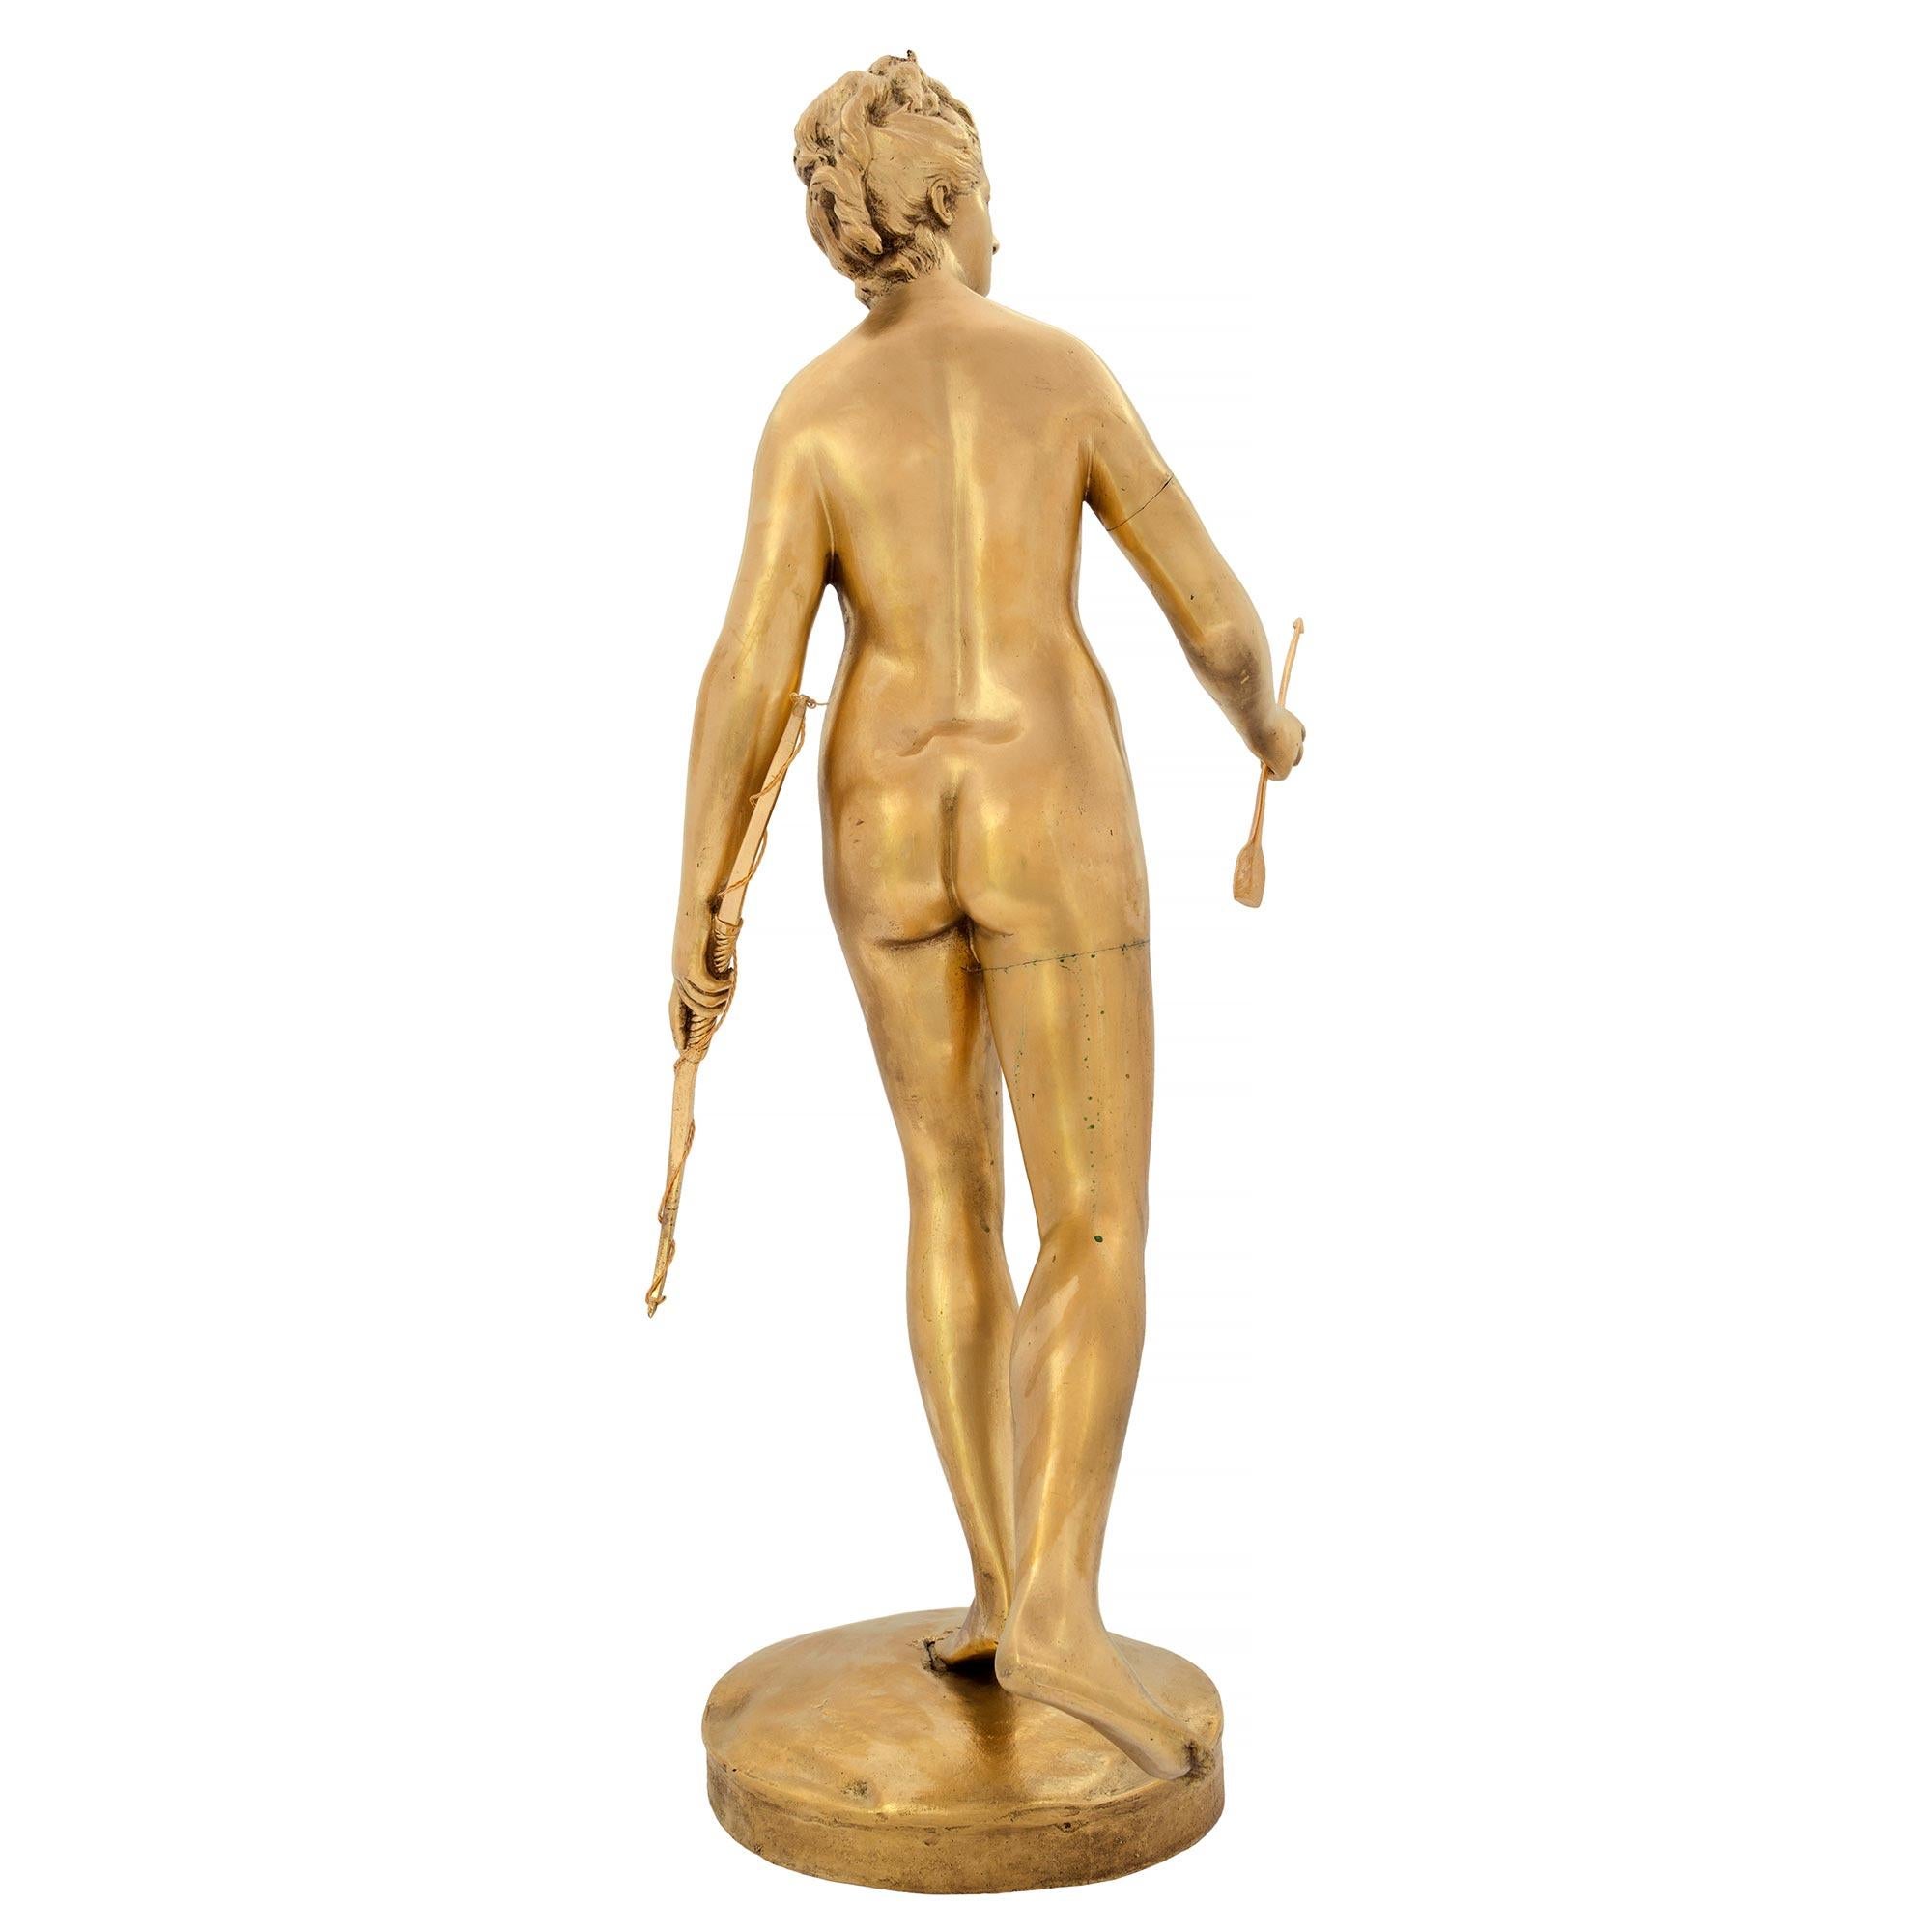 An elegant French 19th century Louis XVI st. ormolu statue of Diana the Huntress signed HOUDON. The famous statue is raised by a circular base with a ground like design where the signature is displayed. The richly chased Diana stands on her left leg